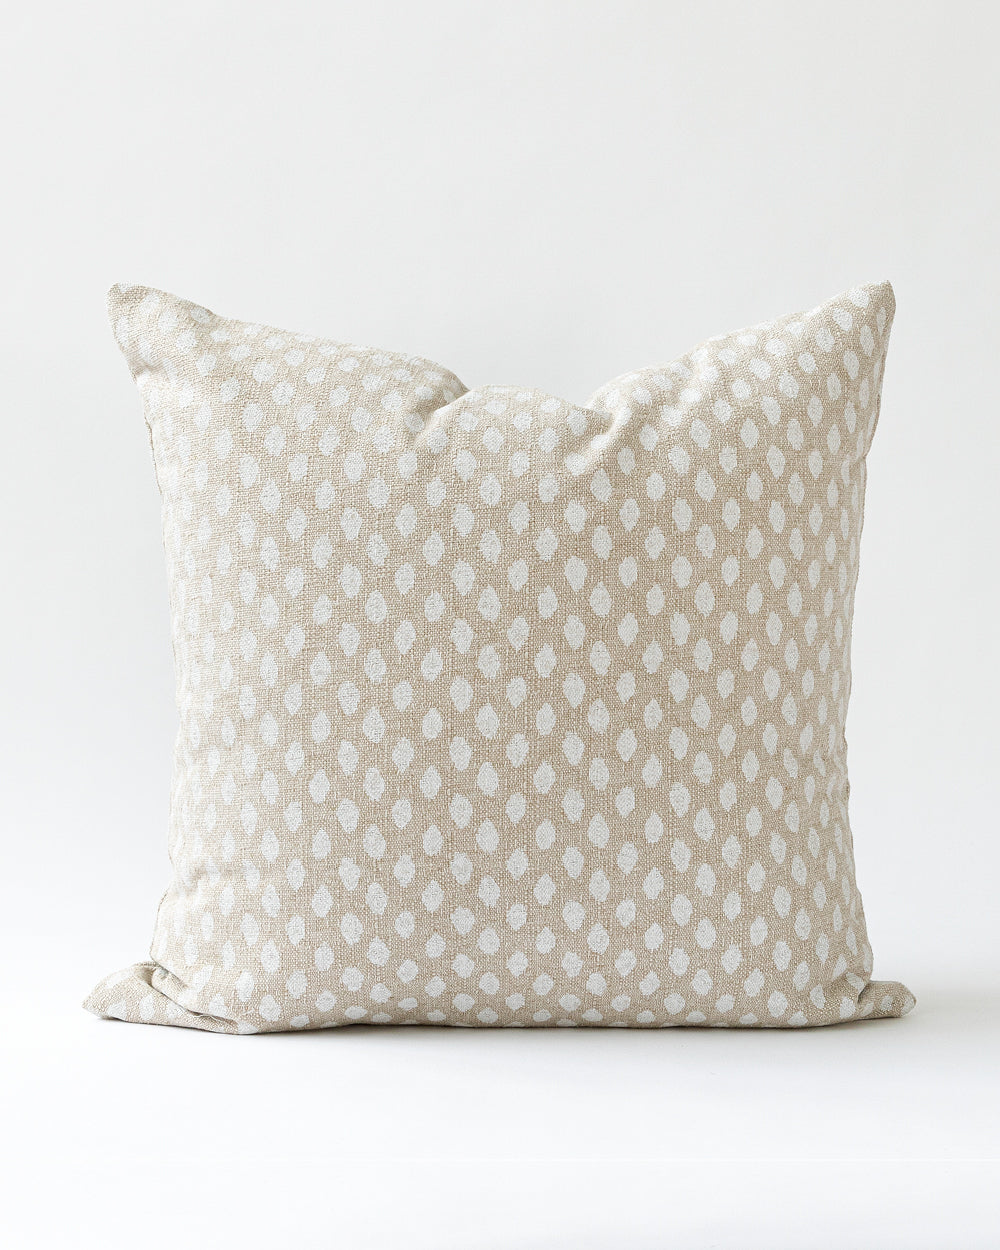 Square ikat inspired dot pillow in a creamy white on a natural beige background